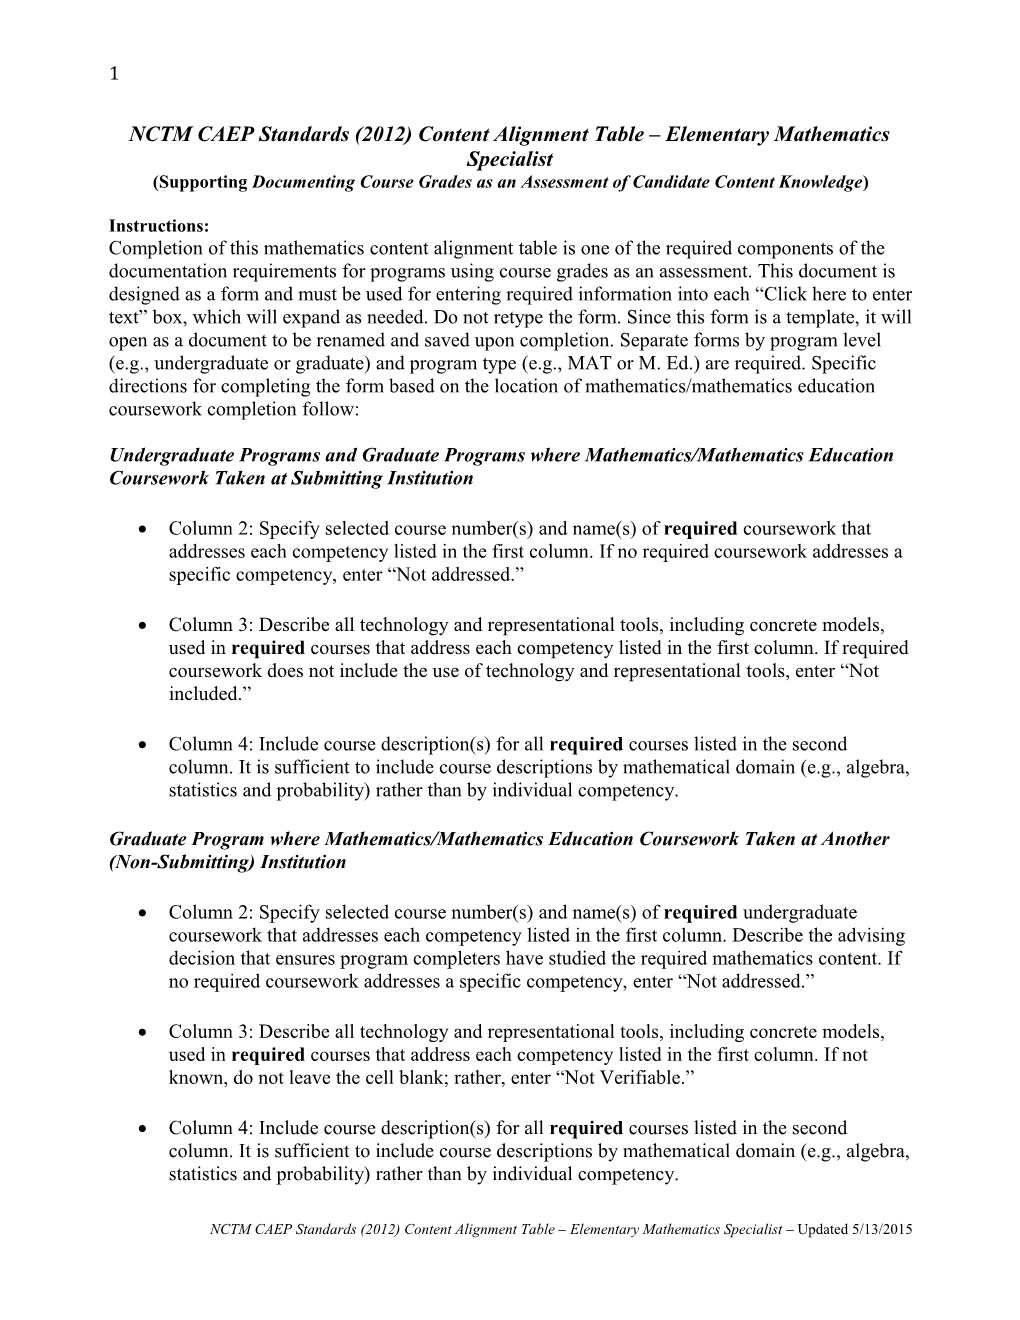 NCTM CAEP Standards (2012) Content Alignment Table Elementary Mathematics Specialist